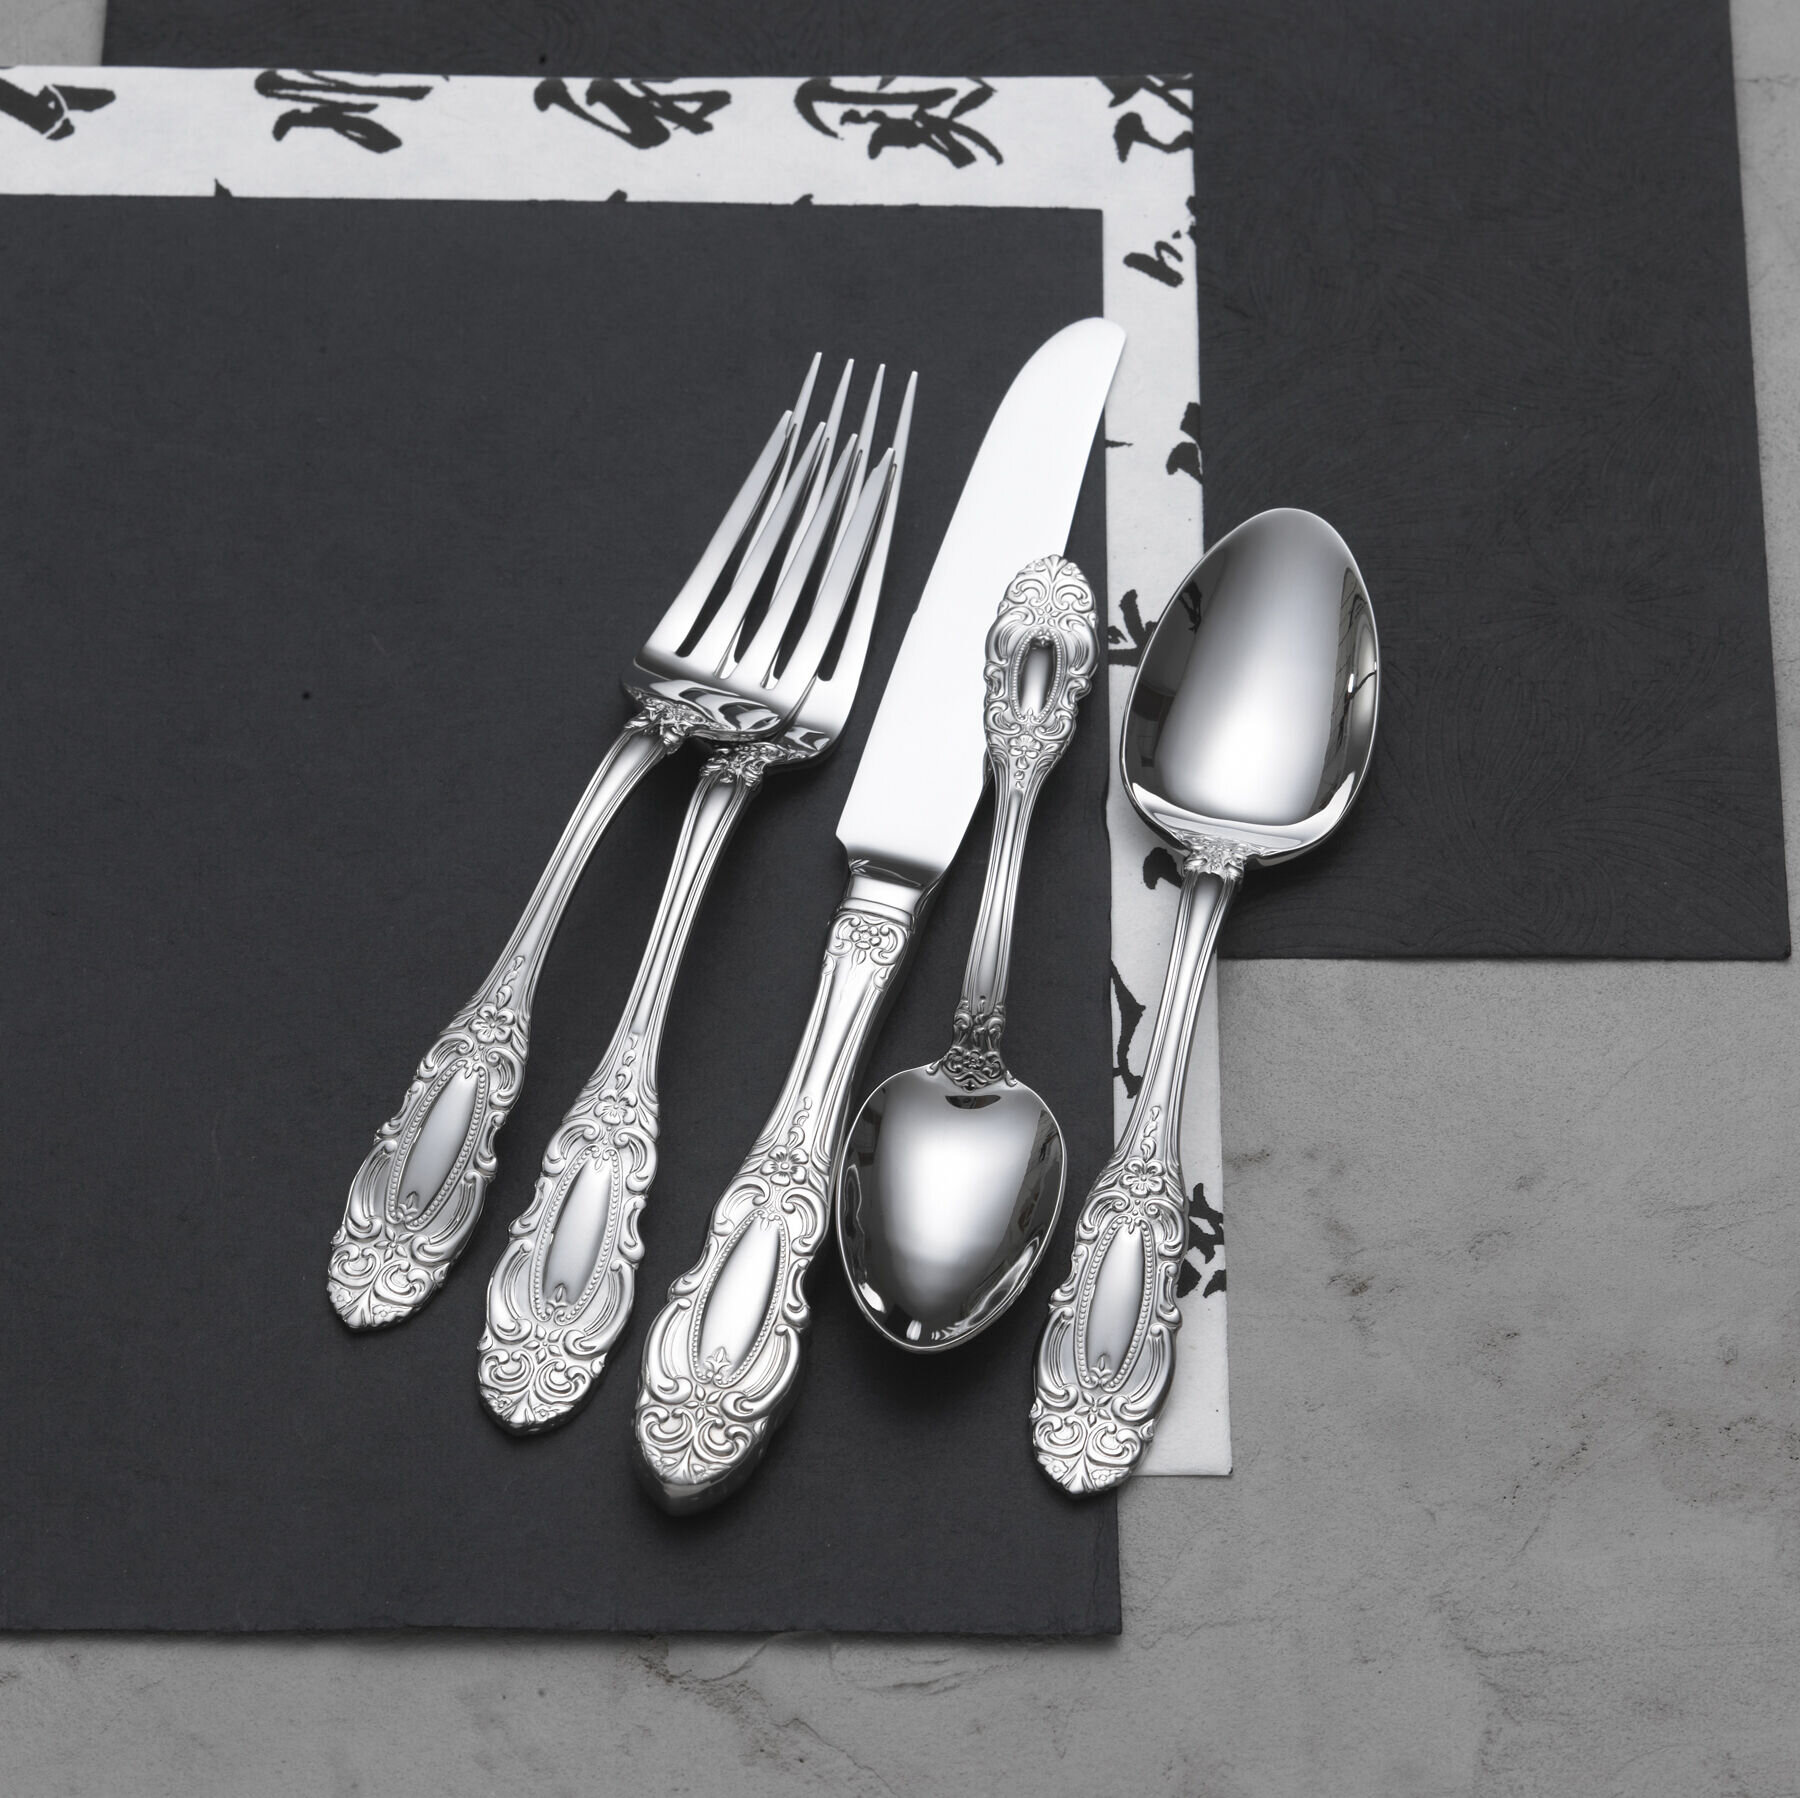 Wallace SOMERSET Choice Set of 4 Dinner Forks 18/10 Stainless Flatware Indonesia 